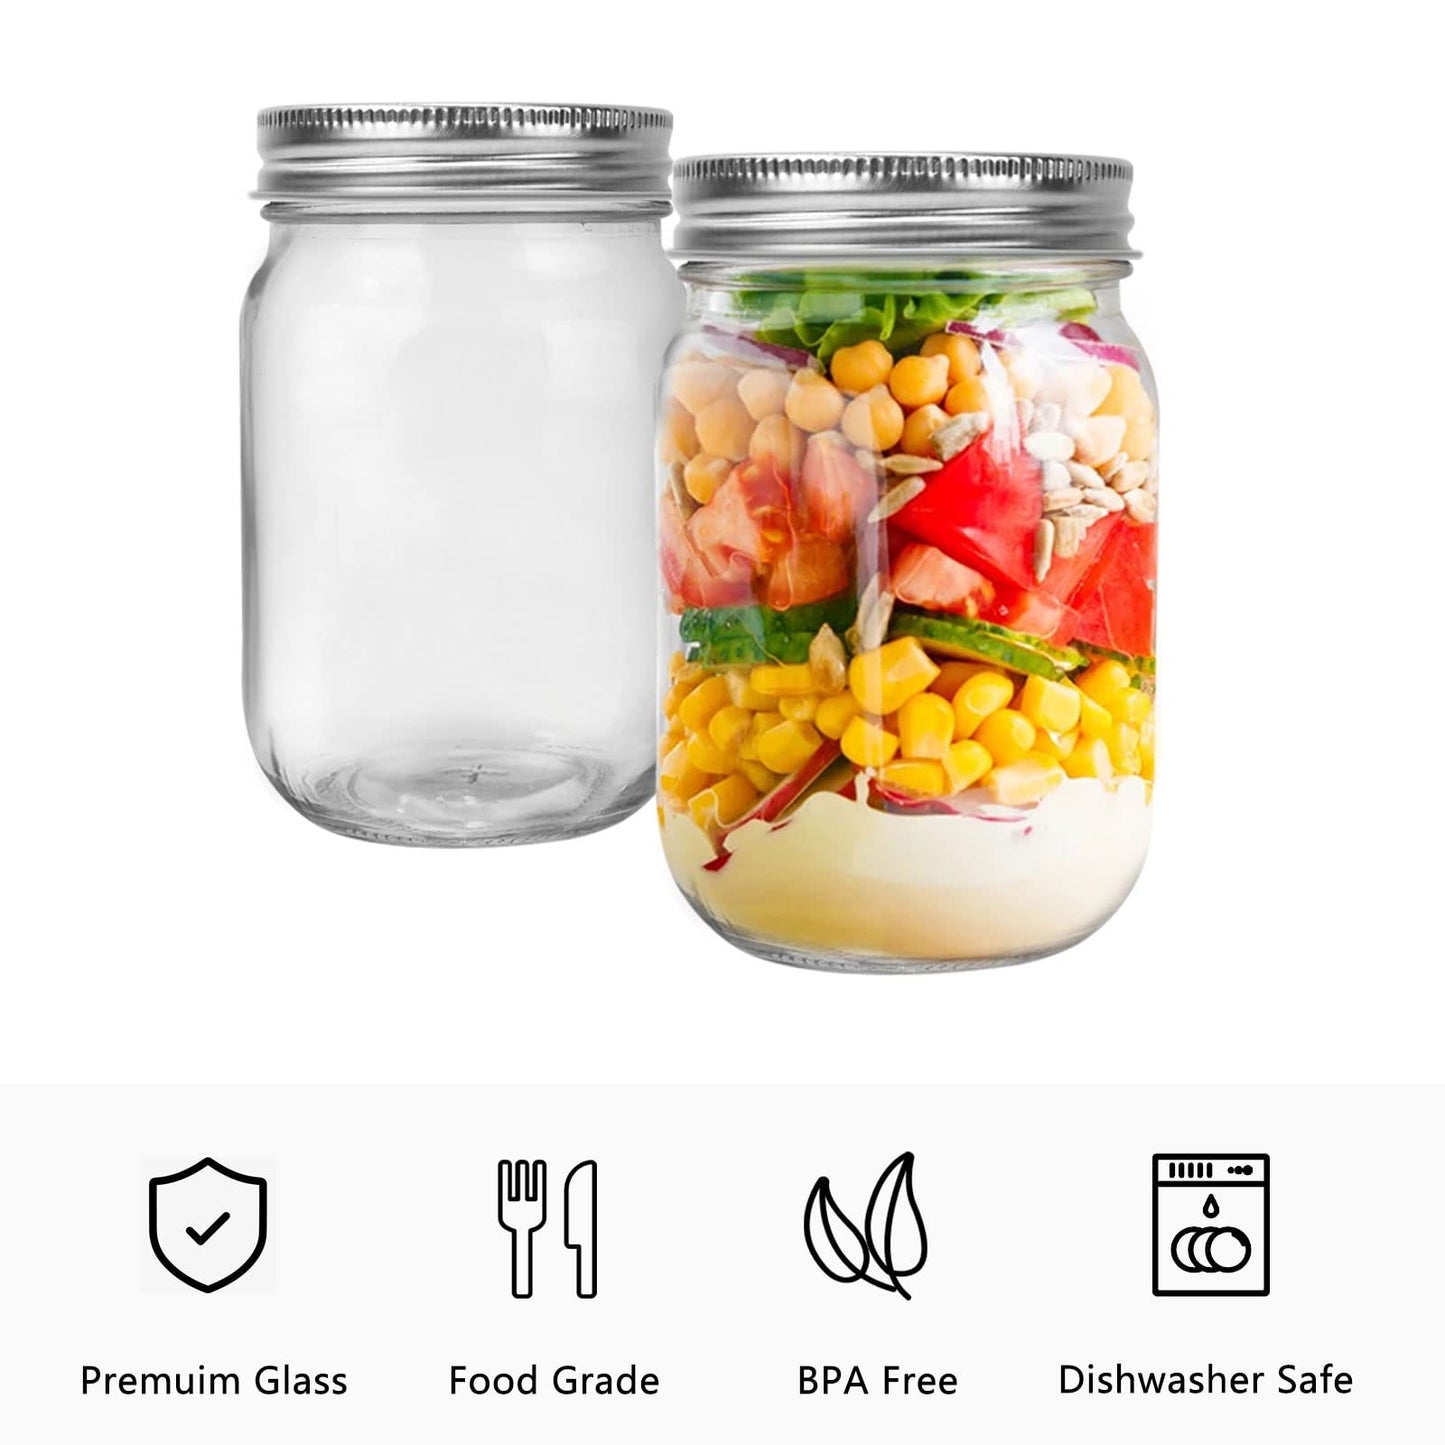 20 Pack Glass Mason Jars, 12 oz Clear Glass Jars with Regular Mouth and Silver Metal lids, Canning Jars for Food Storage, Vegetables and Dry Food, Includes 30 Black Labels